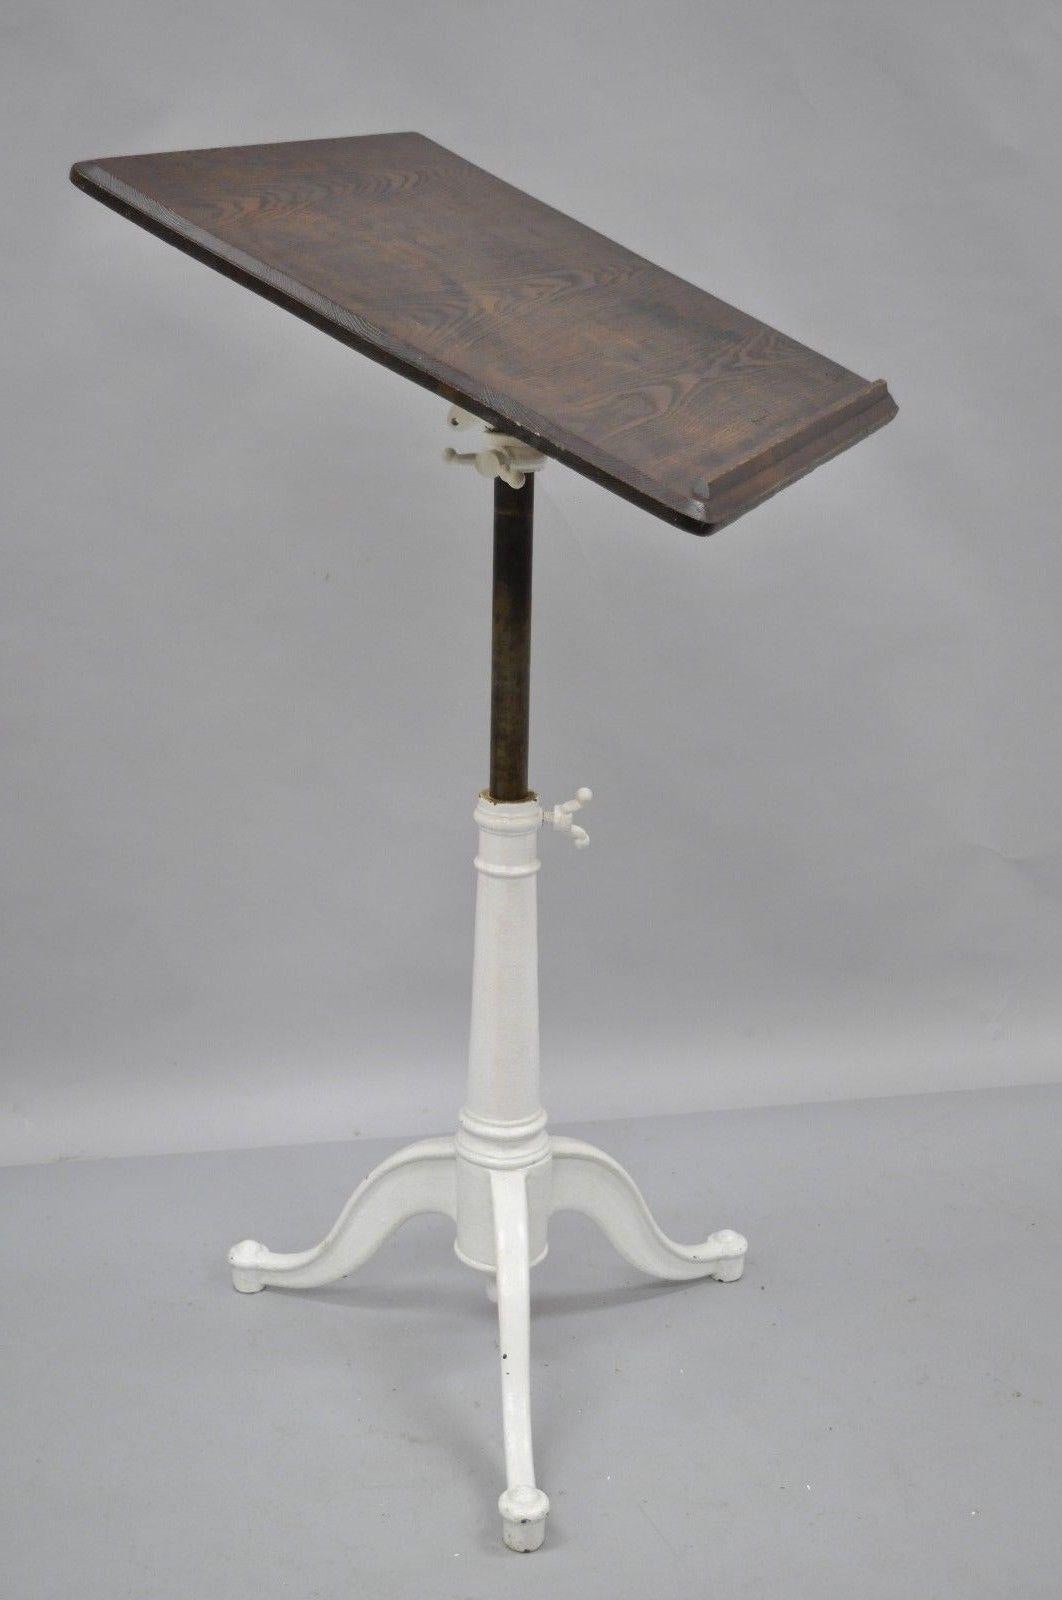 Eugene Dietzgen Cast Iron and Wood Small Drafting Work Table Desk Tripod Base 2